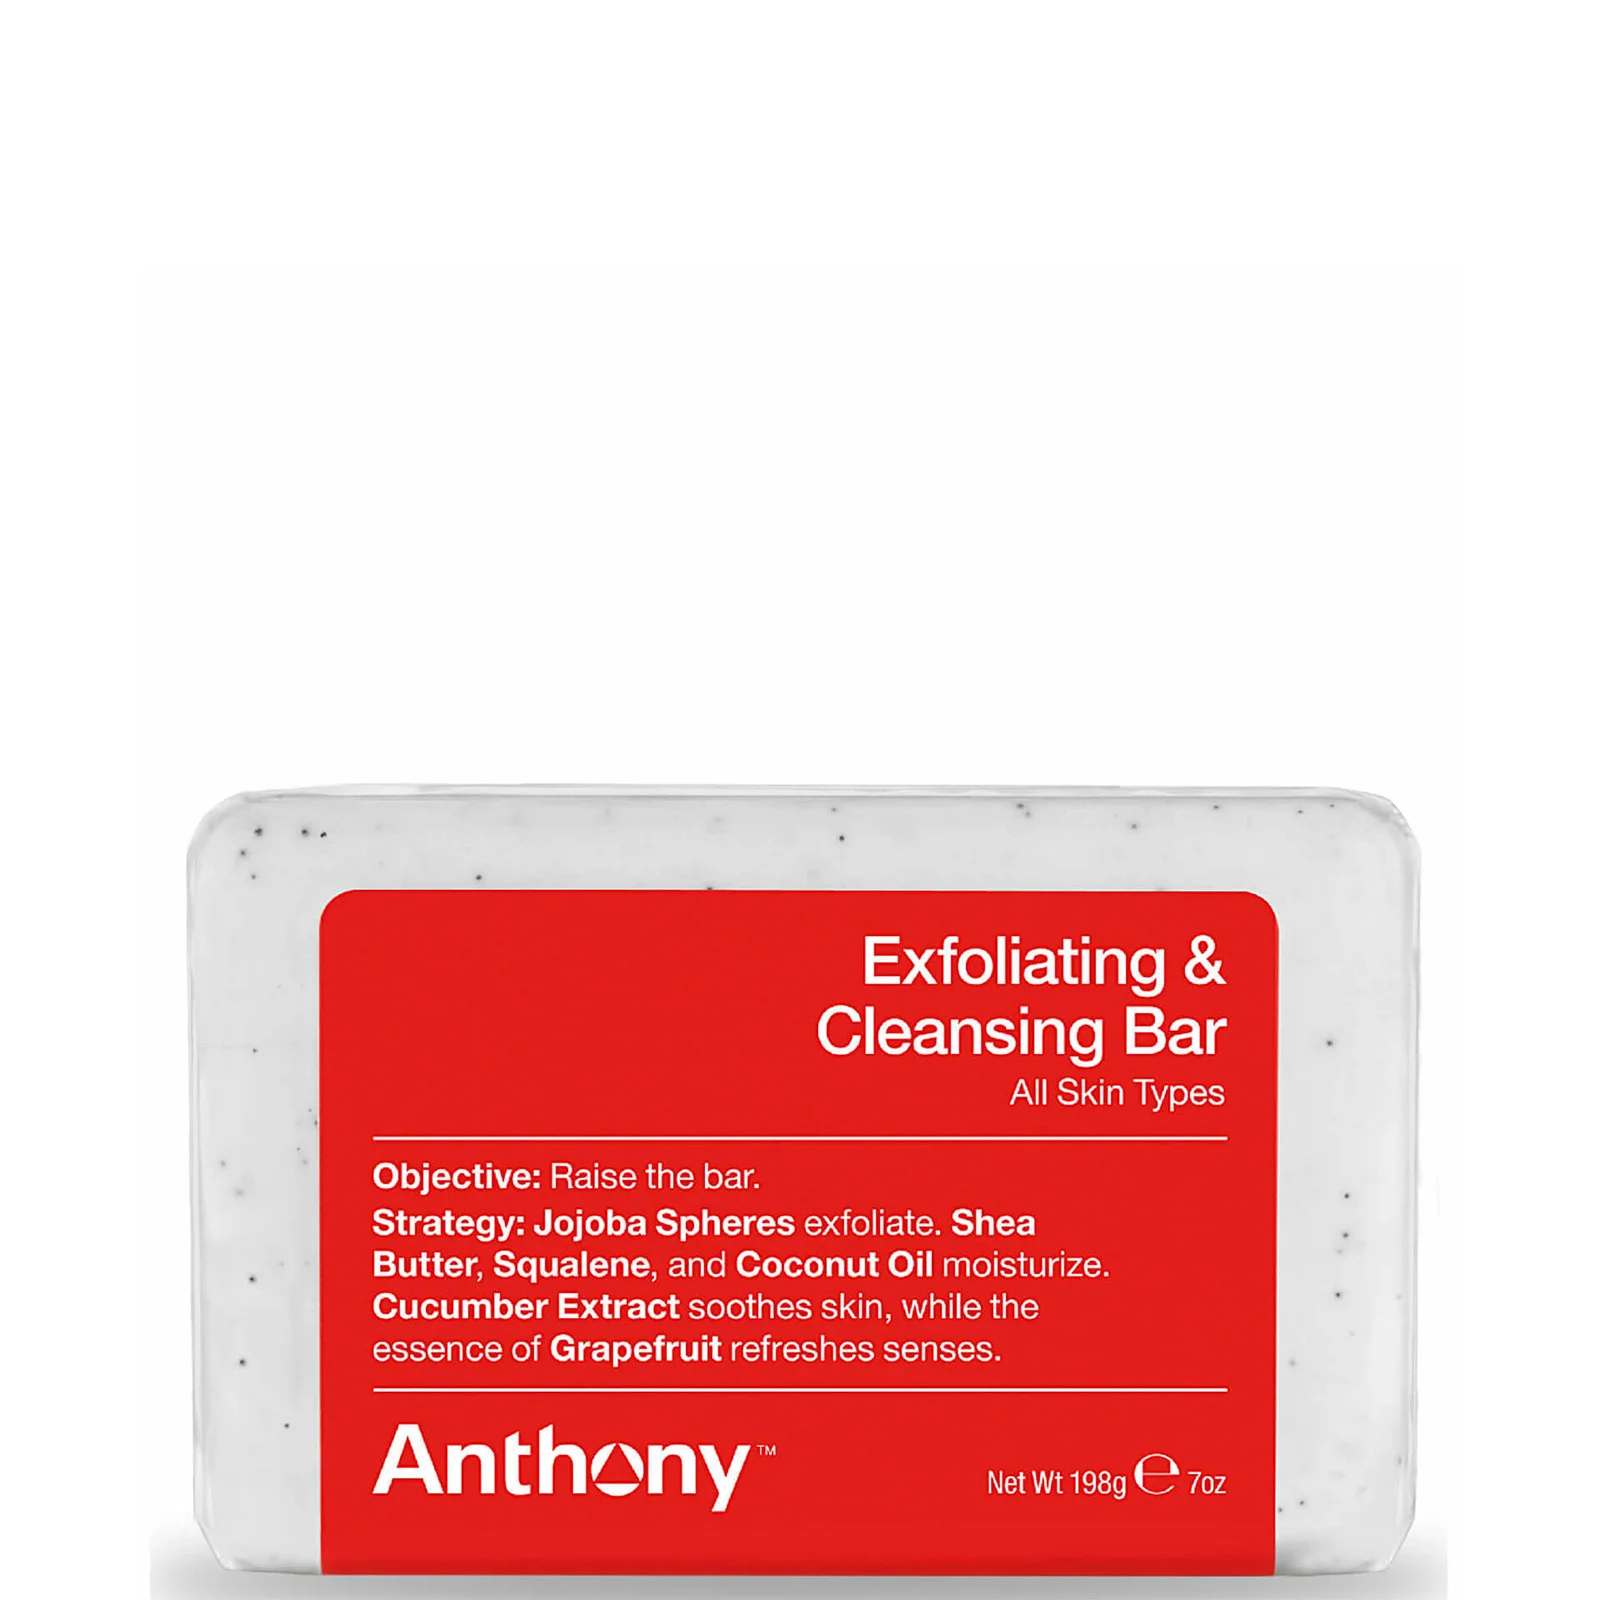 Anthony Exfoliating and Cleansing Bar 198g Image 1